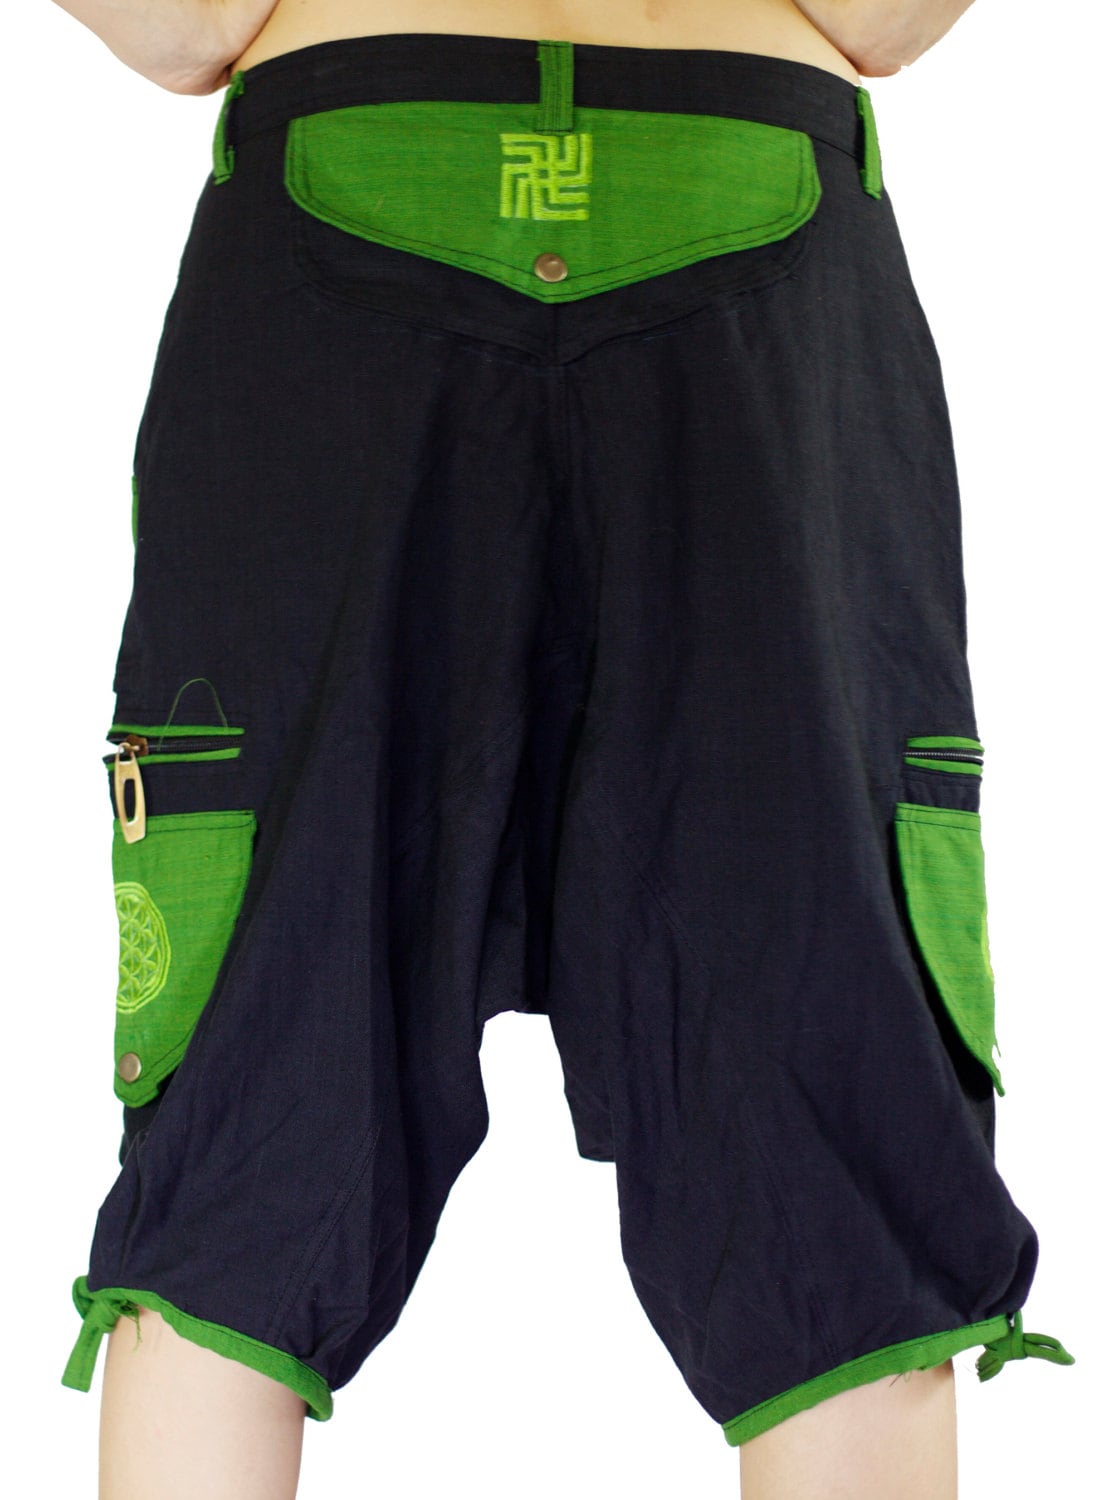 Goa Pant clamdiggers 11 pockets made after order fully customizable with flower of life embroidery